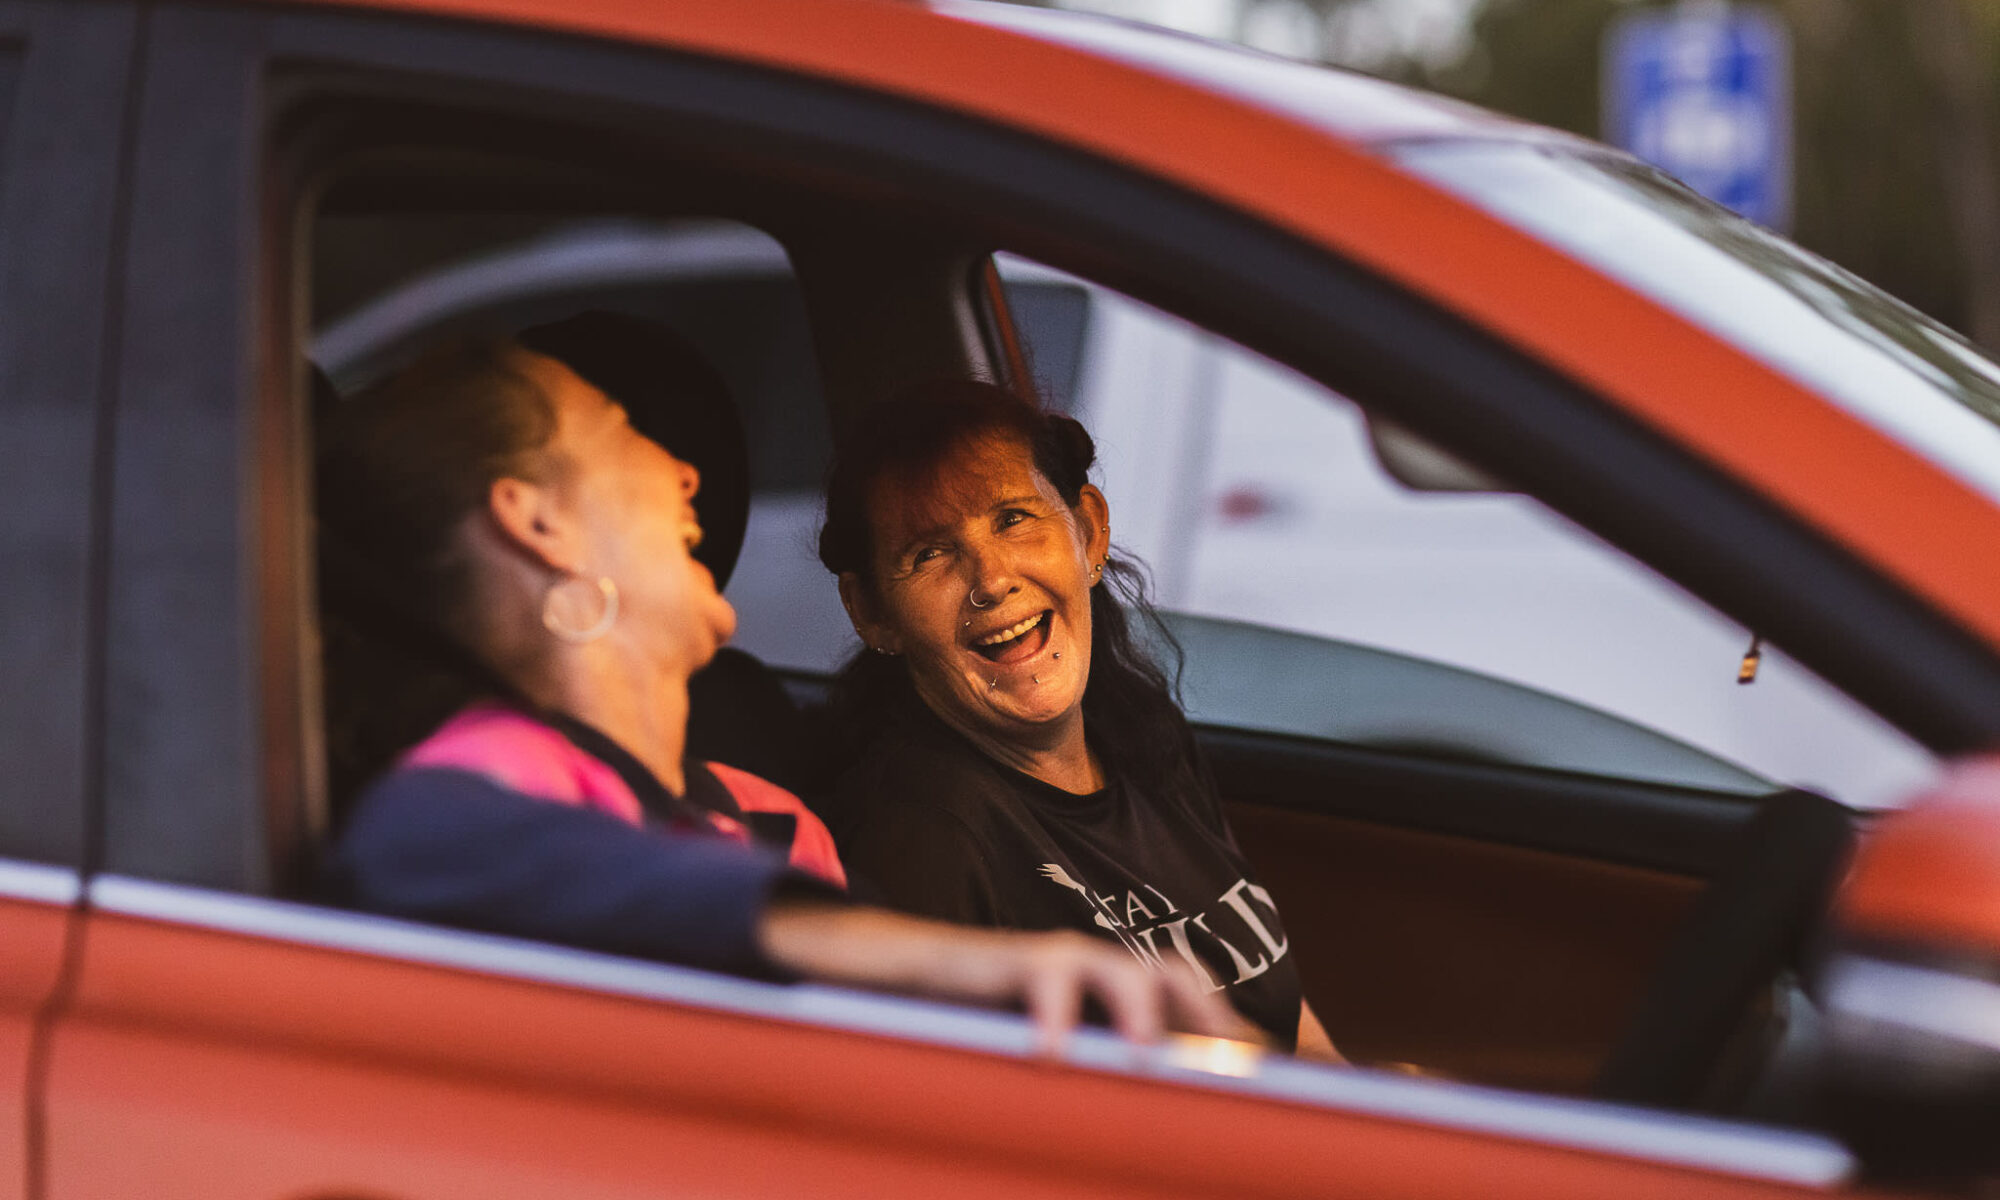 two women sitting in a red car and laughing together